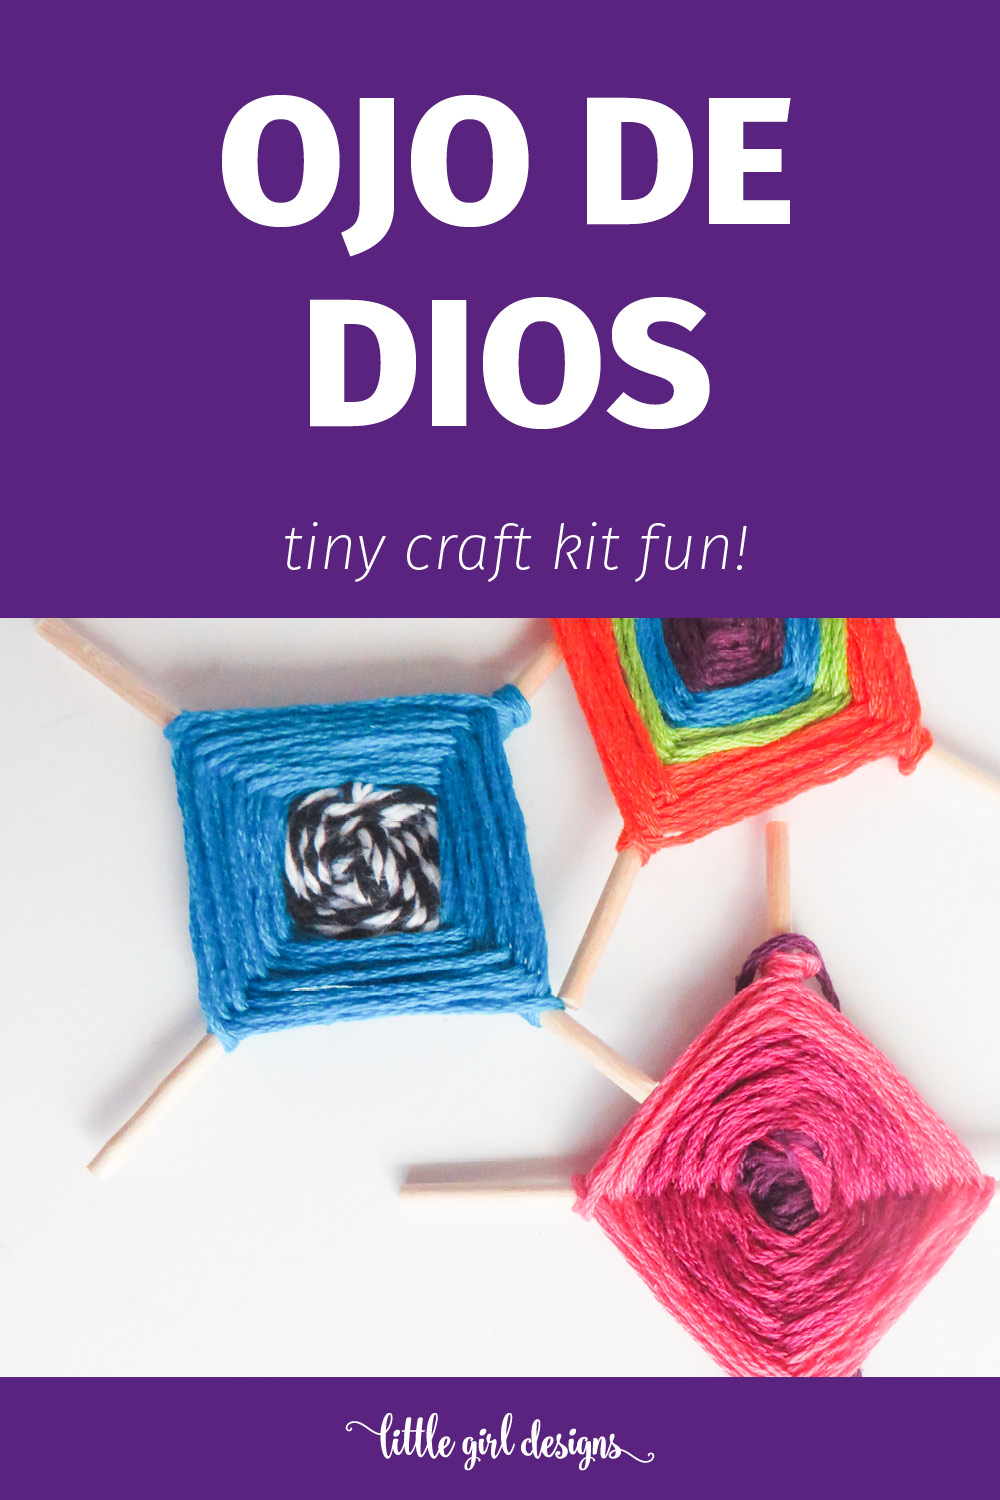 Remember making Ojo de Dios crafts when you went to camp? This kit brings back the good old days in miniature form! The sticks are literally toothpick size and soooo cute!